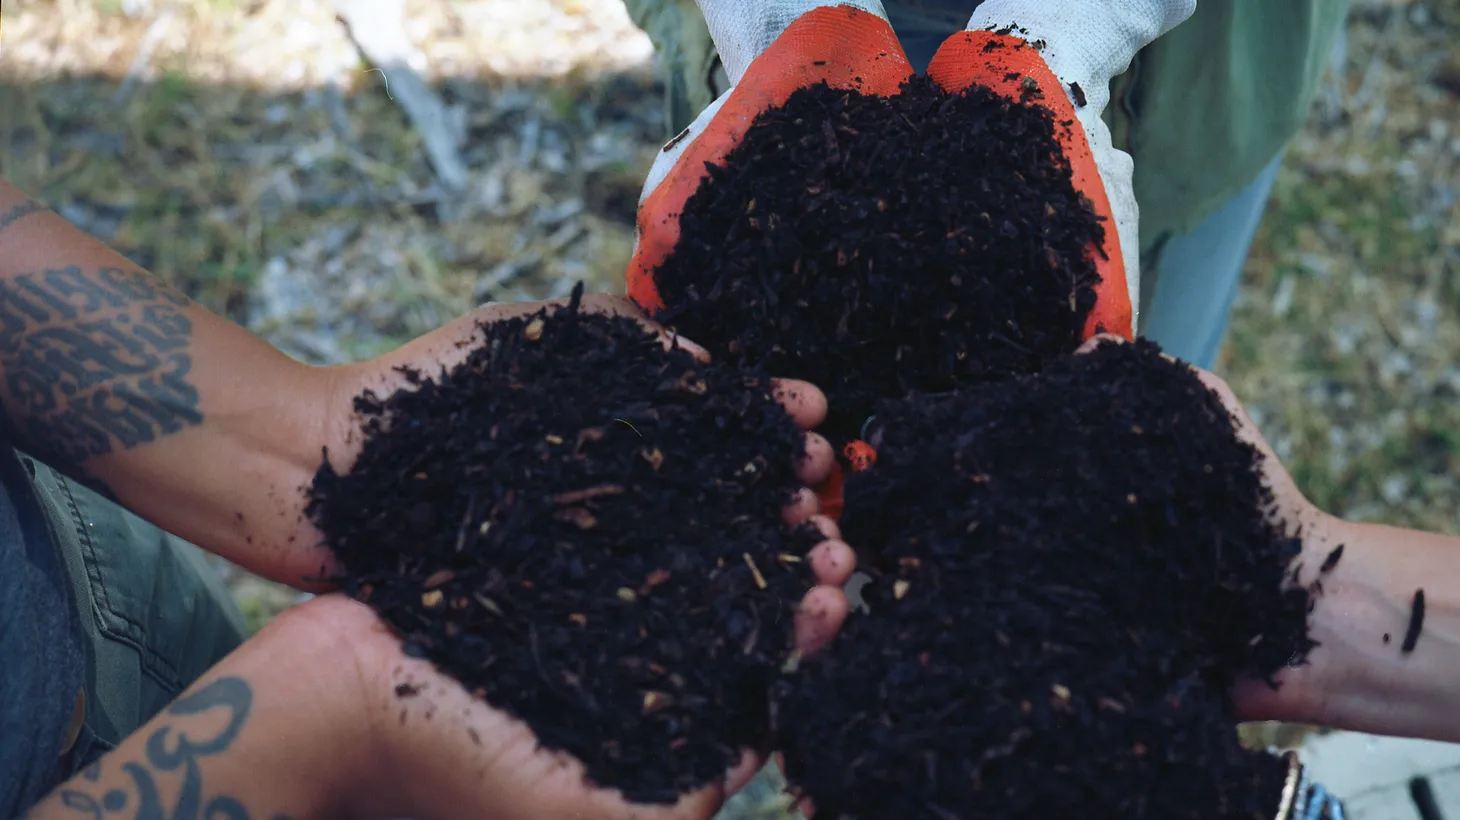 Composting facilities look to convert waste back to the soil and are adopting processes of converting food scraps into a natural methane gas, or turning and aerating material to eliminate greenhouse effects.